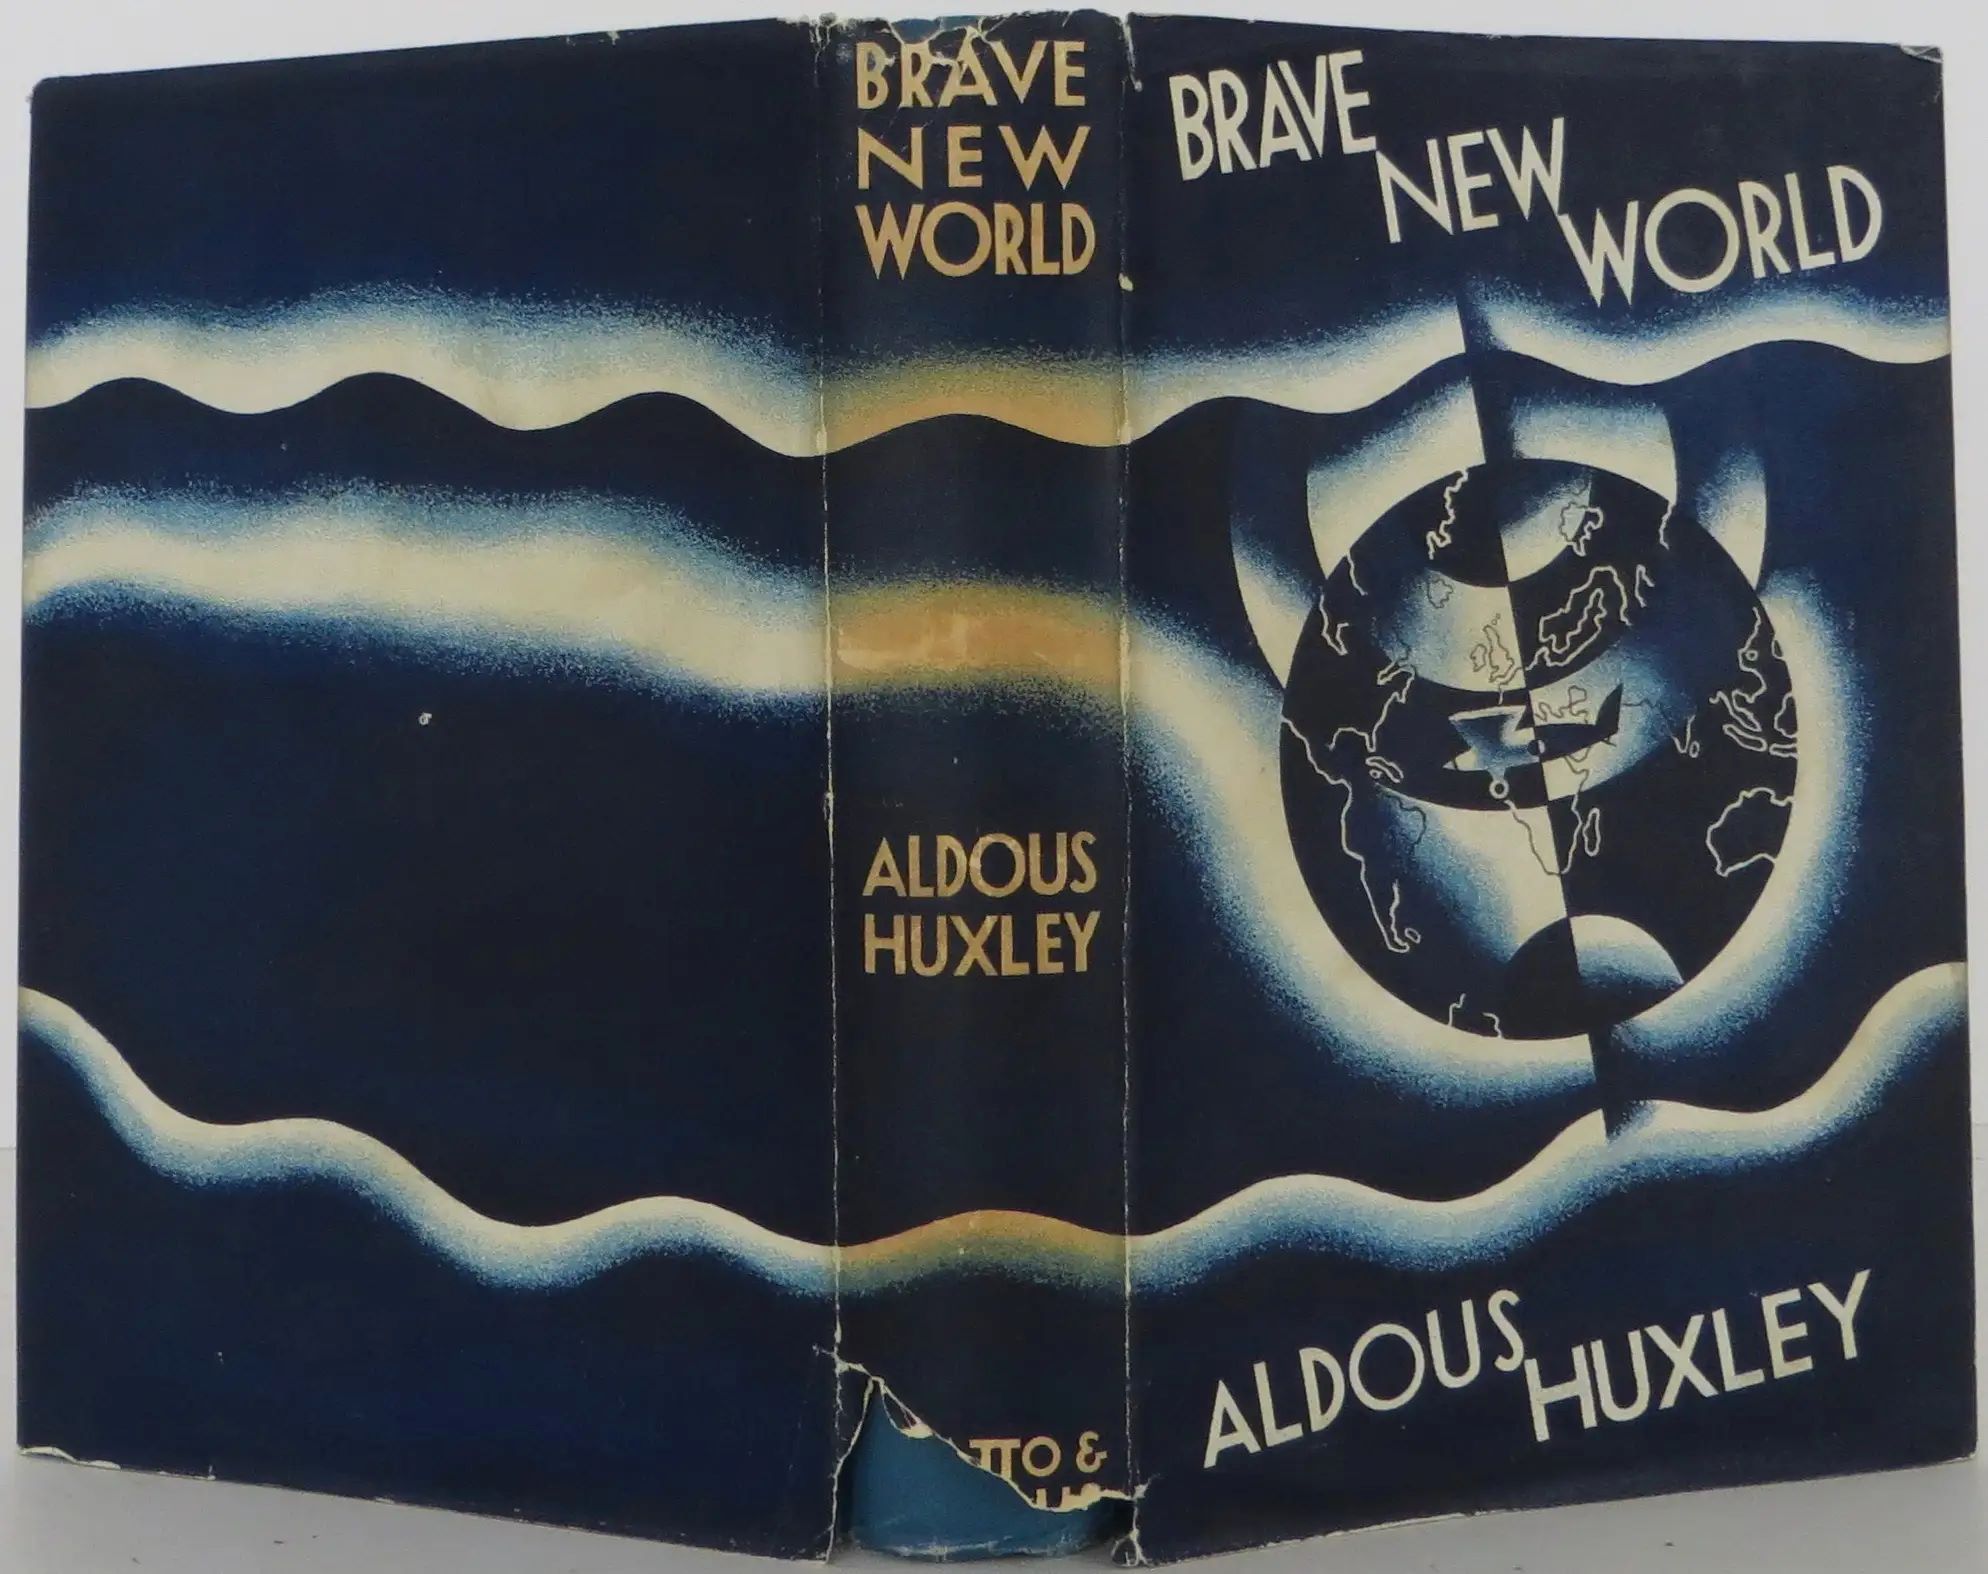 12-mind-blowing-facts-about-brave-new-world-aldous-huxley